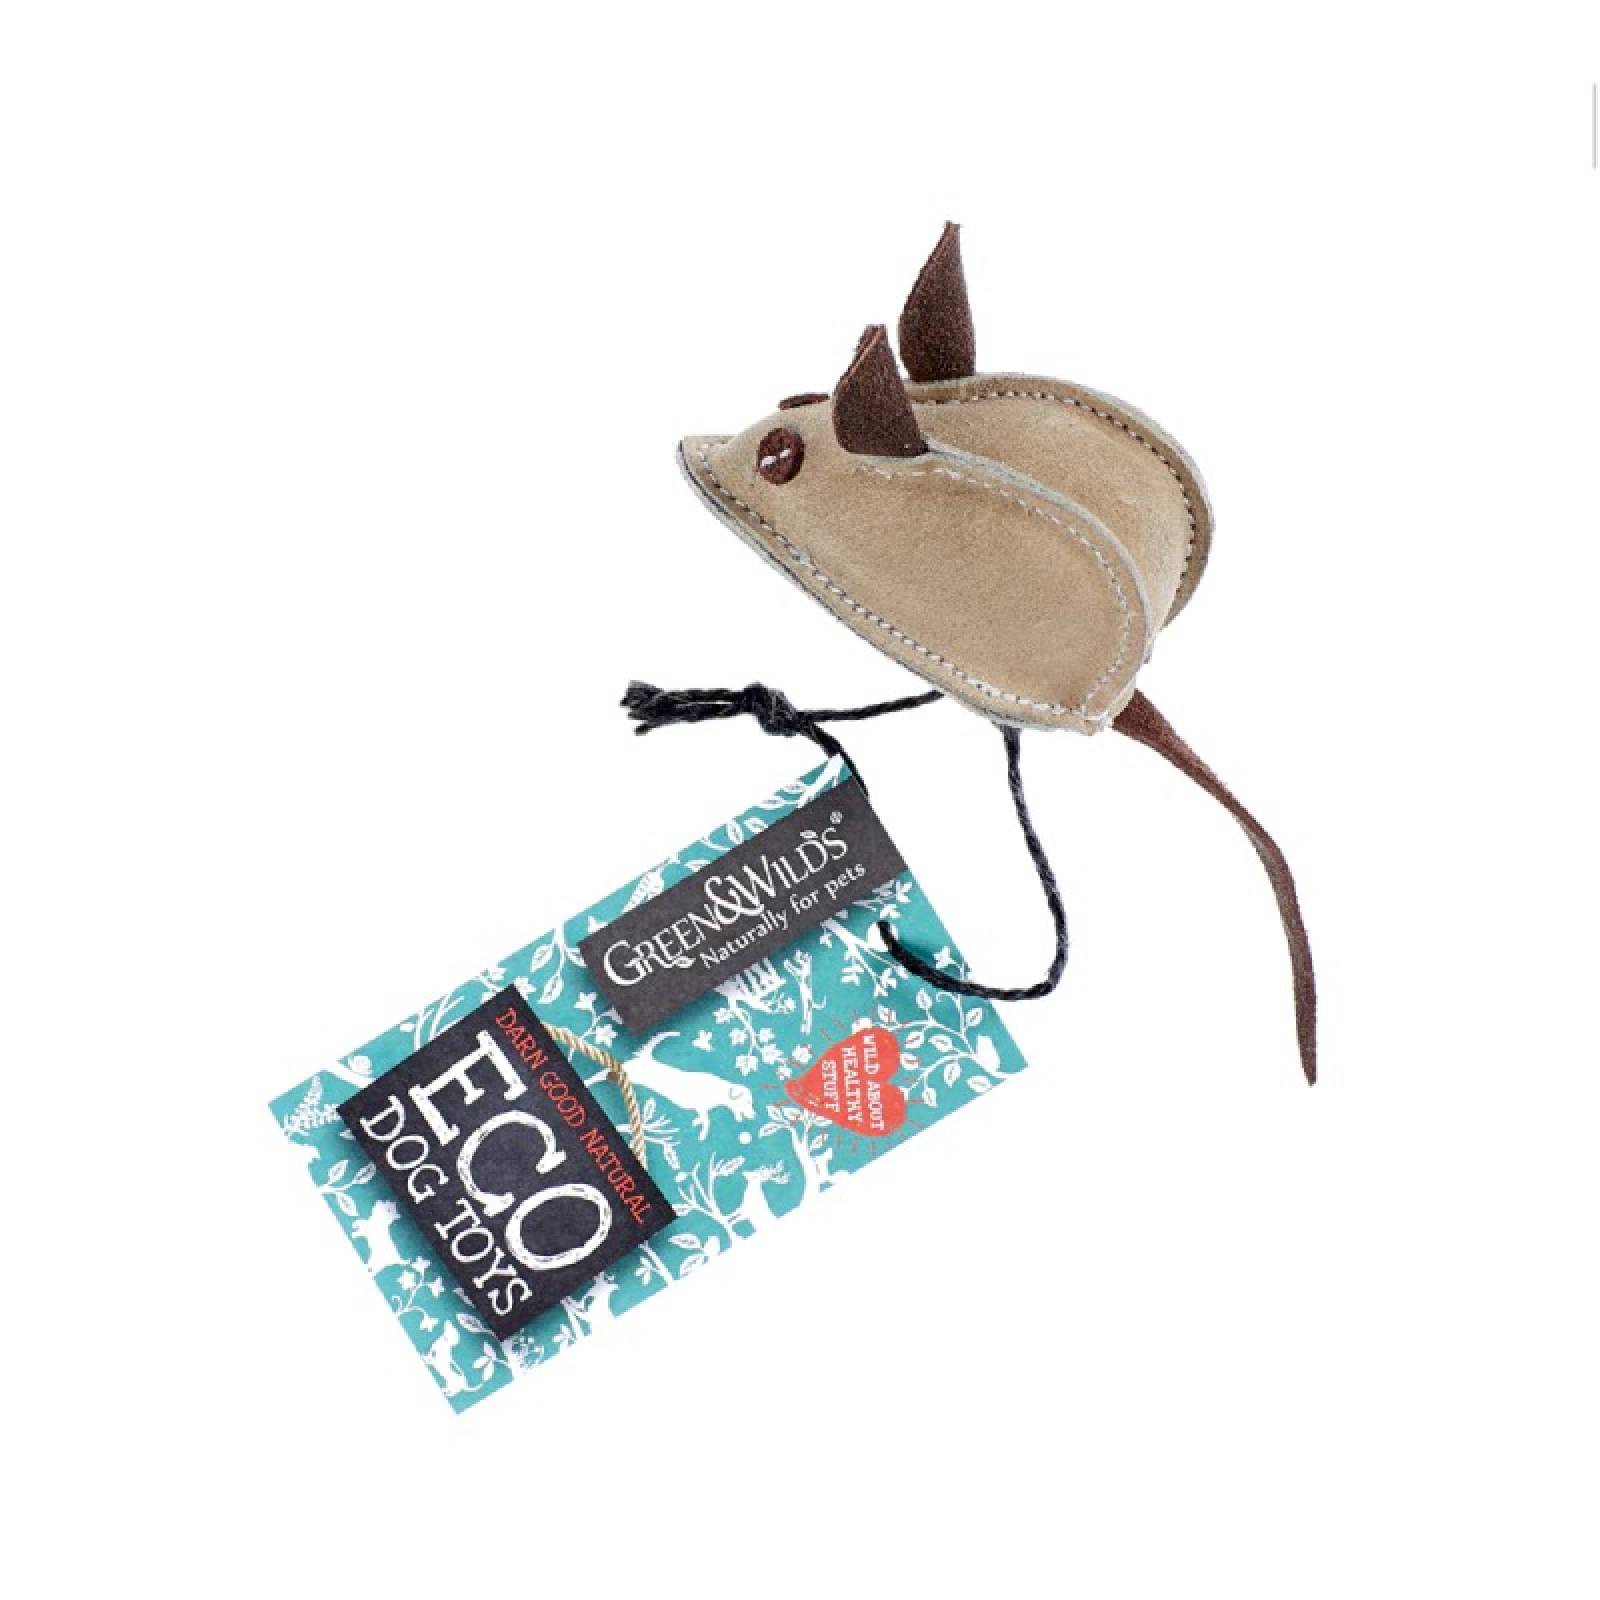 Mike The Mouse Eco Dog Toy